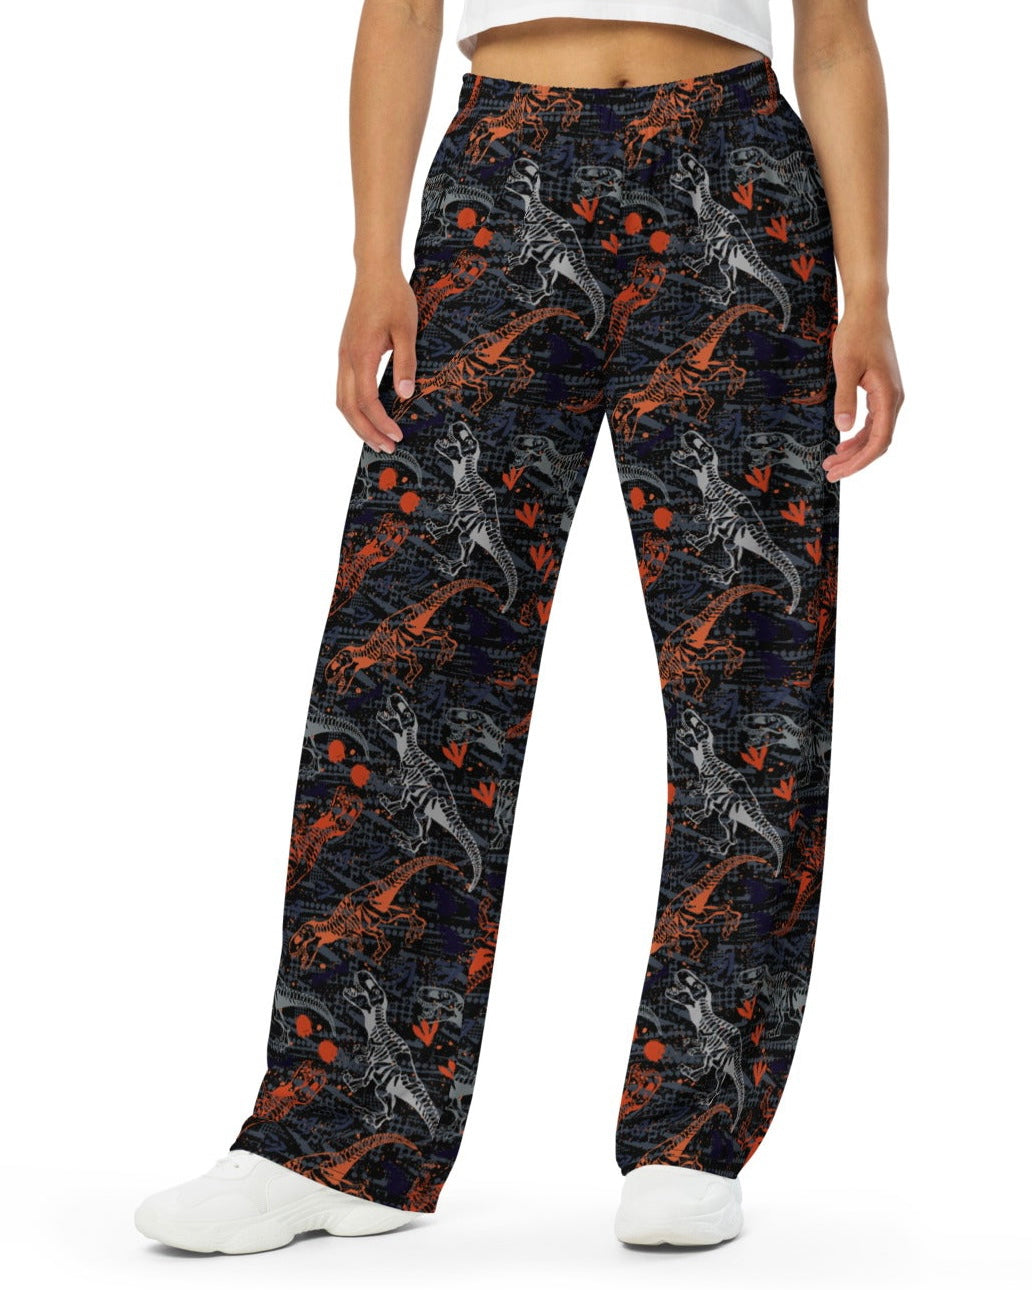 Front view of model rocking One Stop Rave's T-Wrecked Wide Leg Pants with a distinct dinosaur print.